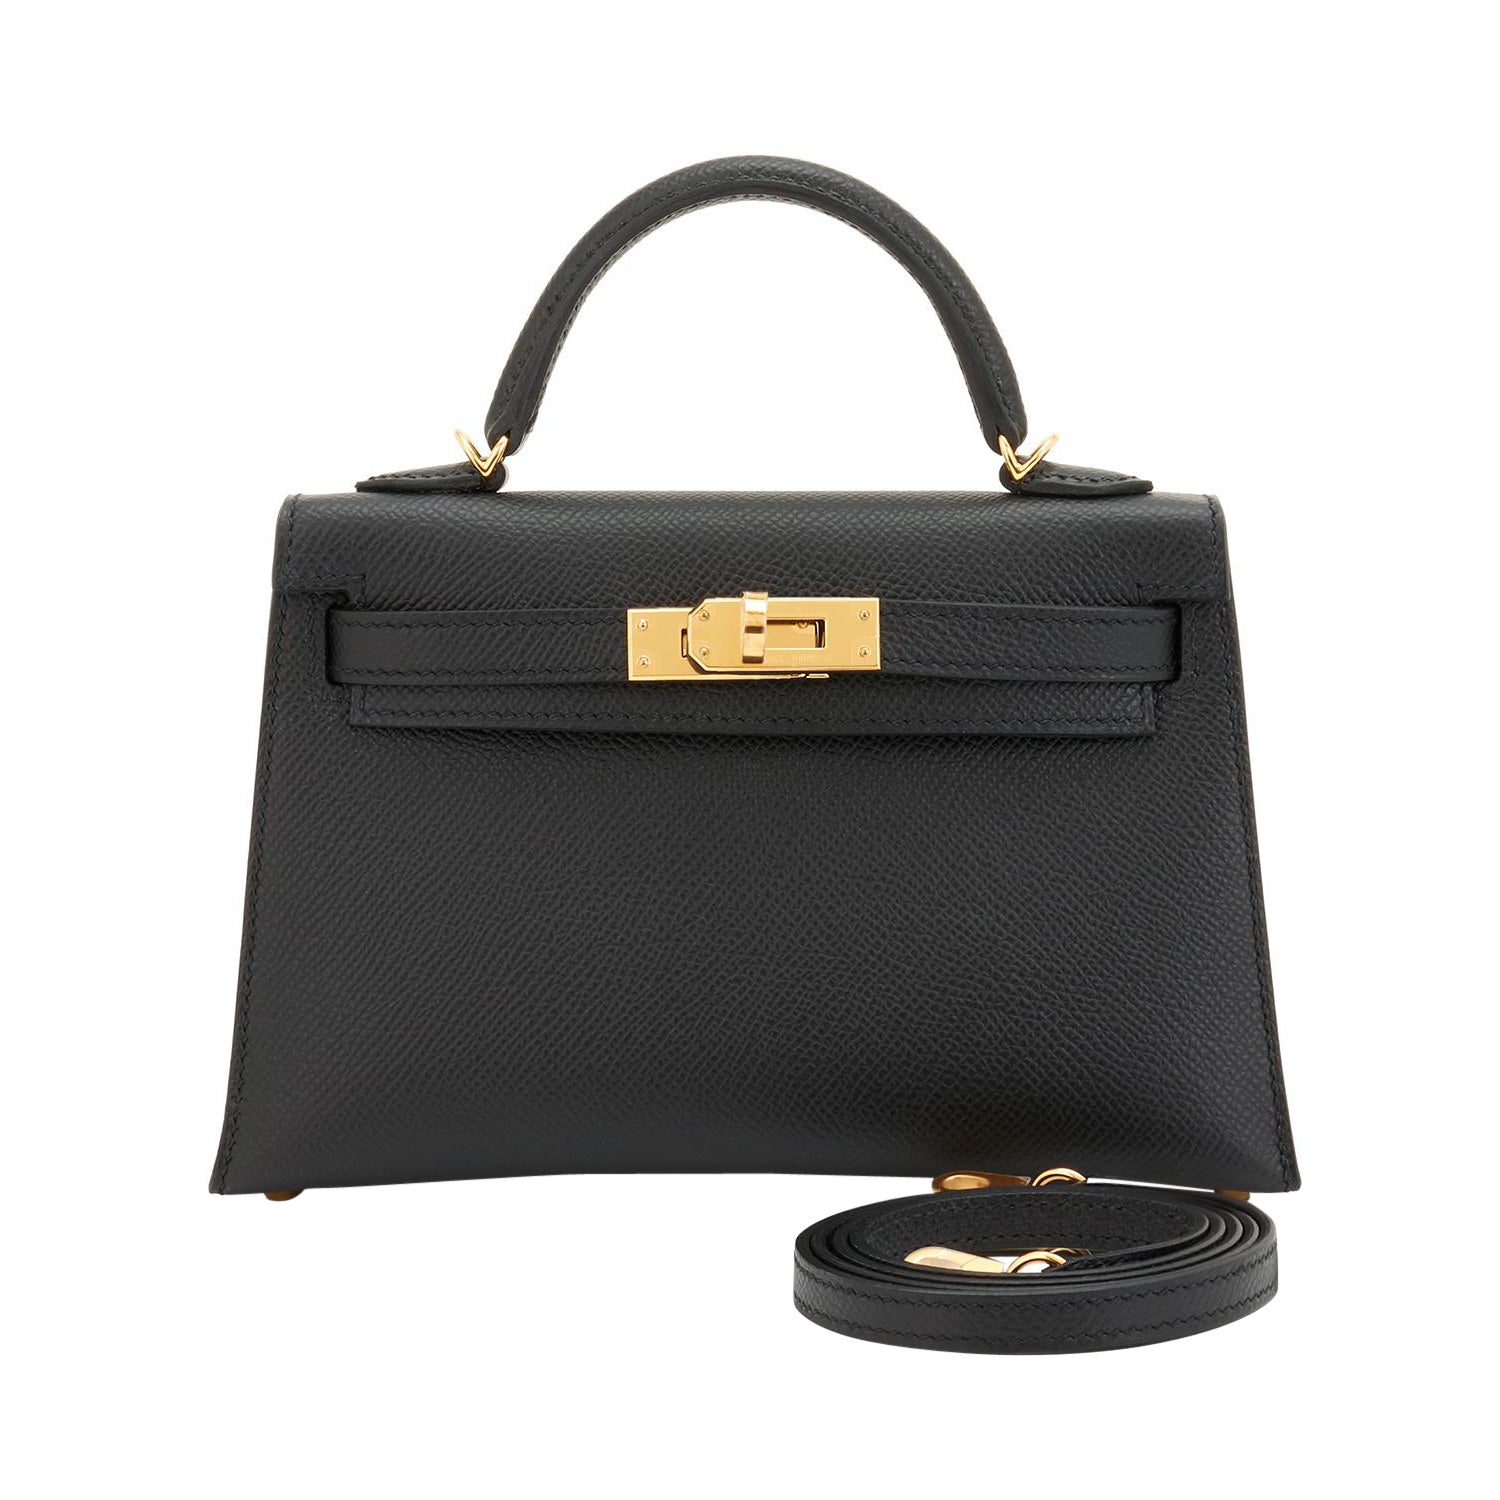 Hermes Mini Kelly 20cm Black VIP Epsom Gold Shoulder Bag, Z Stamp, 2021 
Just purchased from Hermes store; bag bears new 2021 Z Stamp.
Brand New in Box.  Store Fresh. Pristine Condition (with plastic on hardware)
Perfect gift! Comes full set with